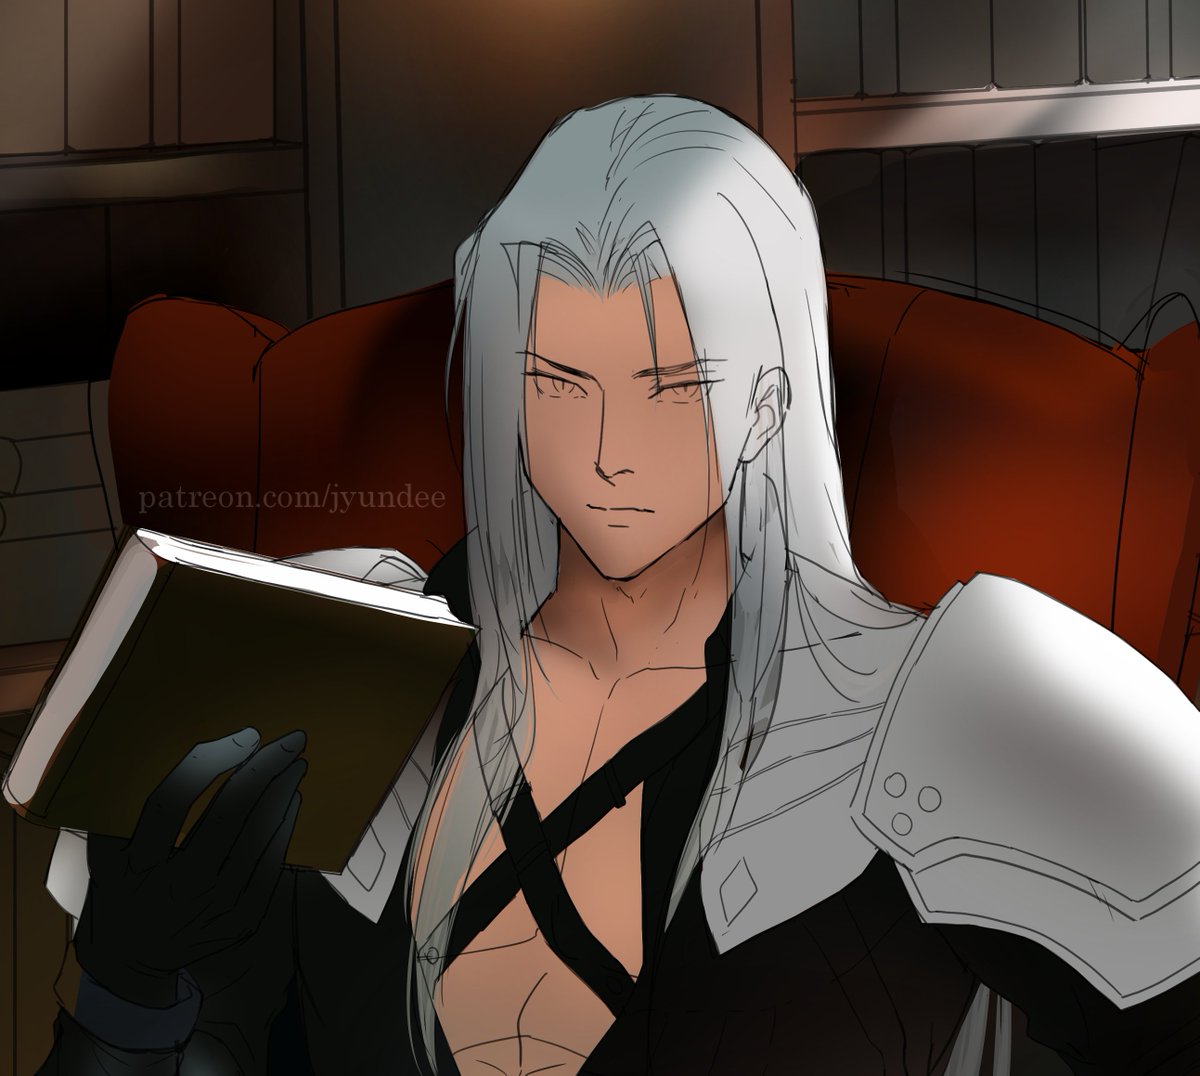 Sephiroth doodle. he shouldn't have touched those books 😬